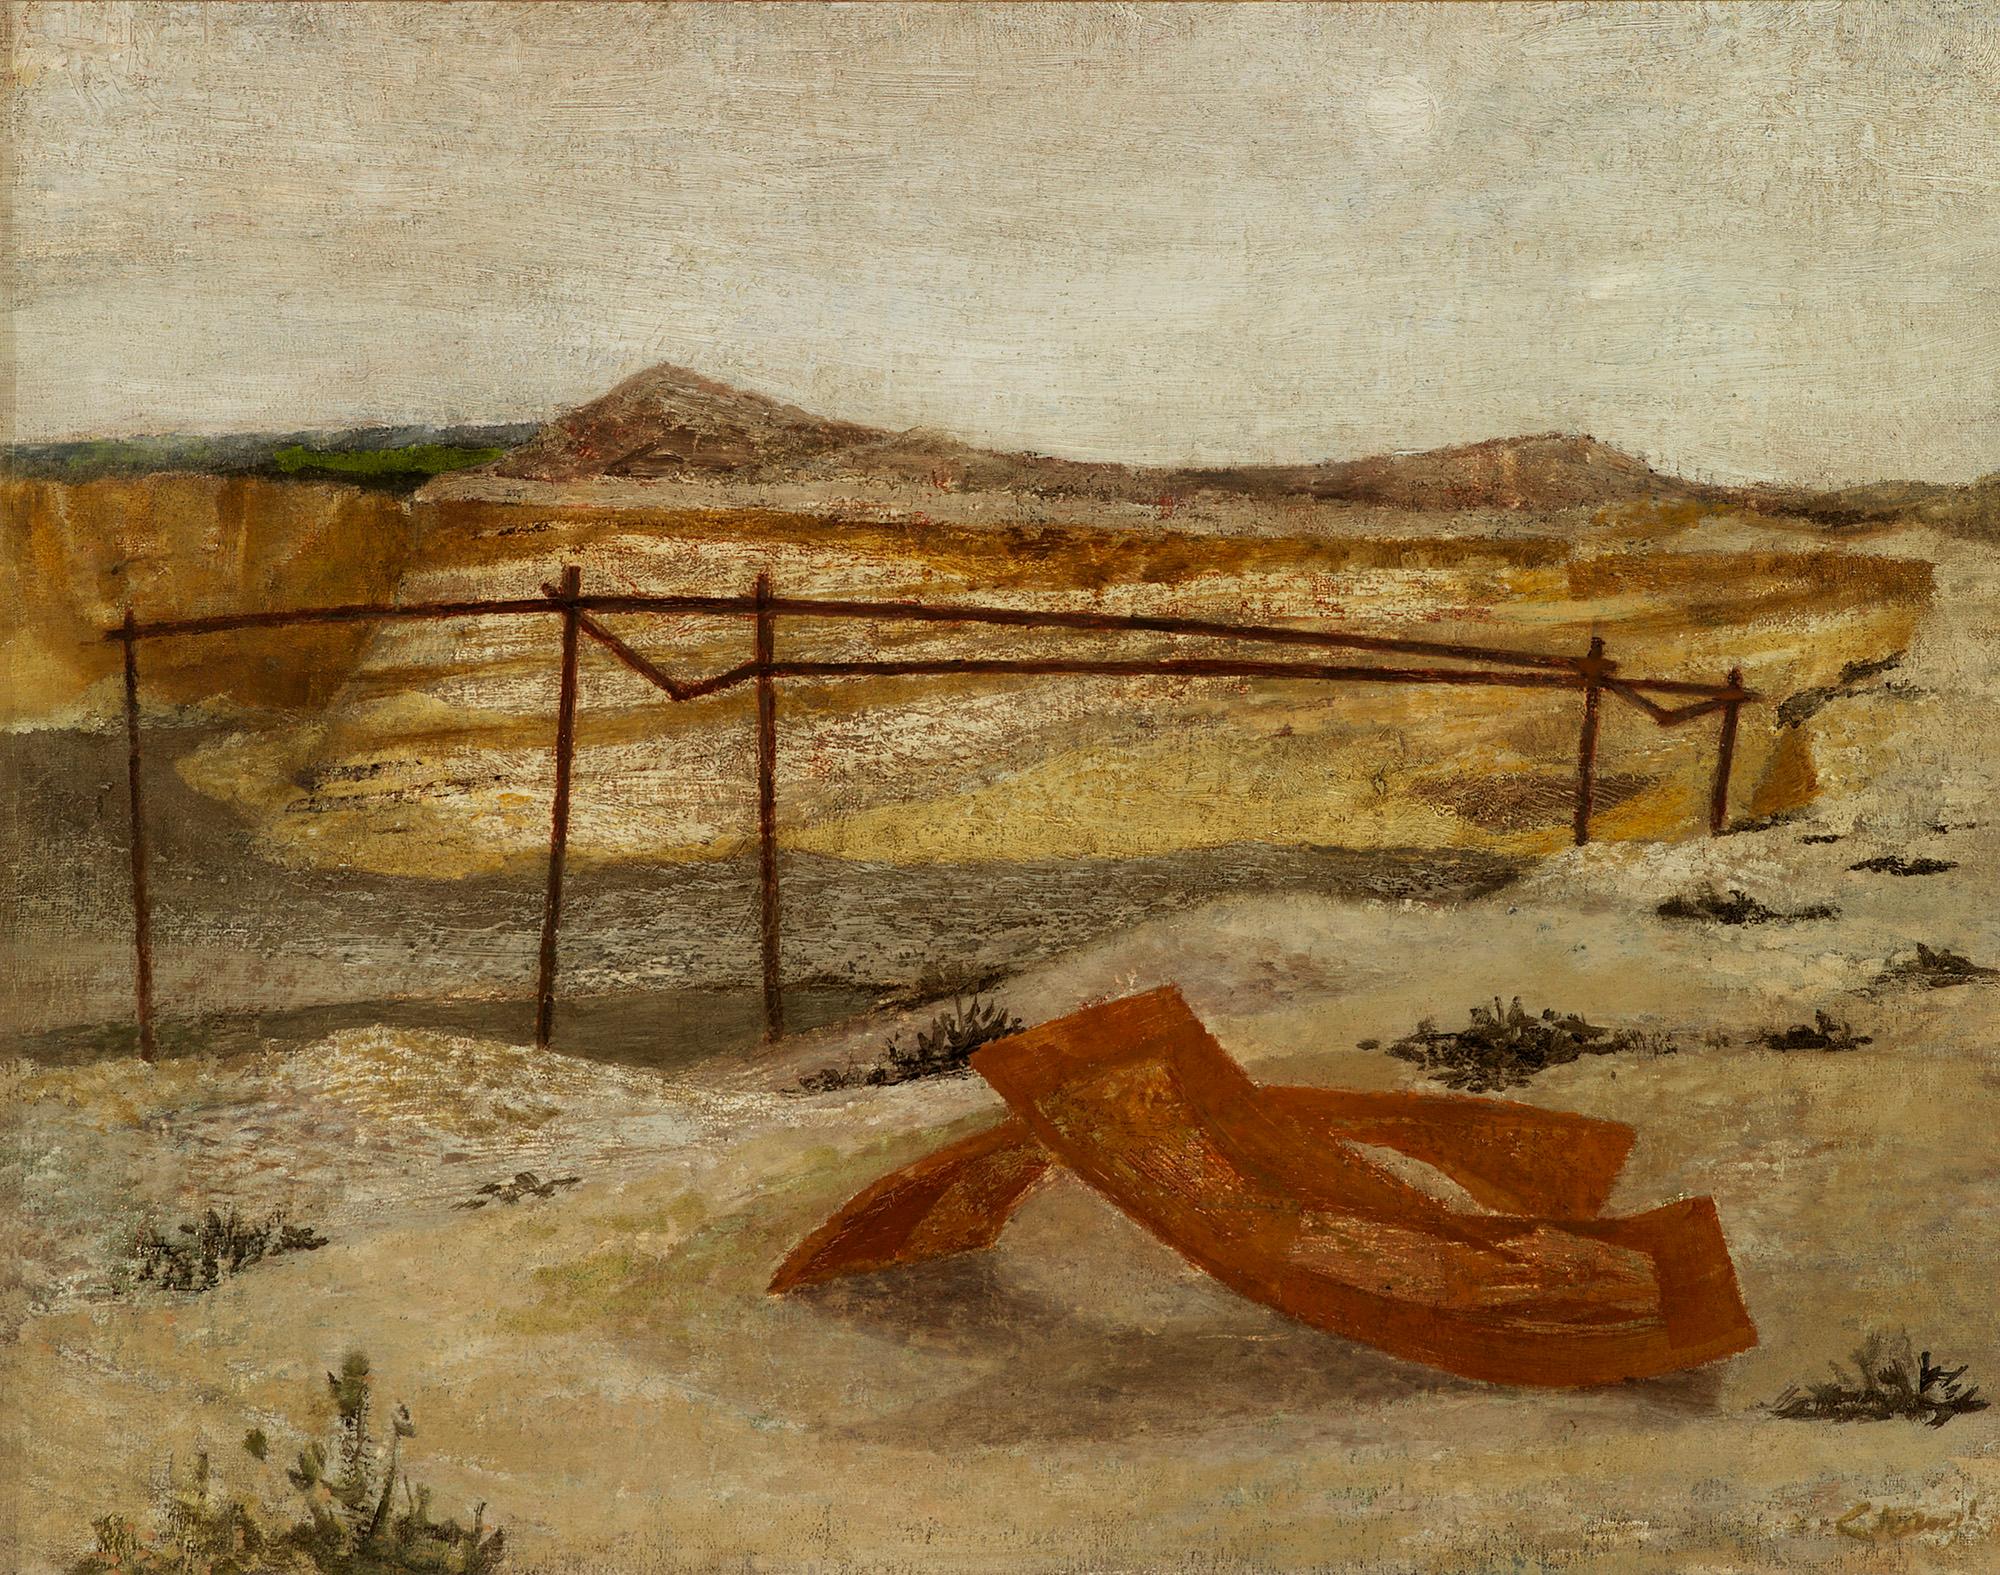 Deserted Gravel Pit - 20th Century, Oil on board by Prunella Clough